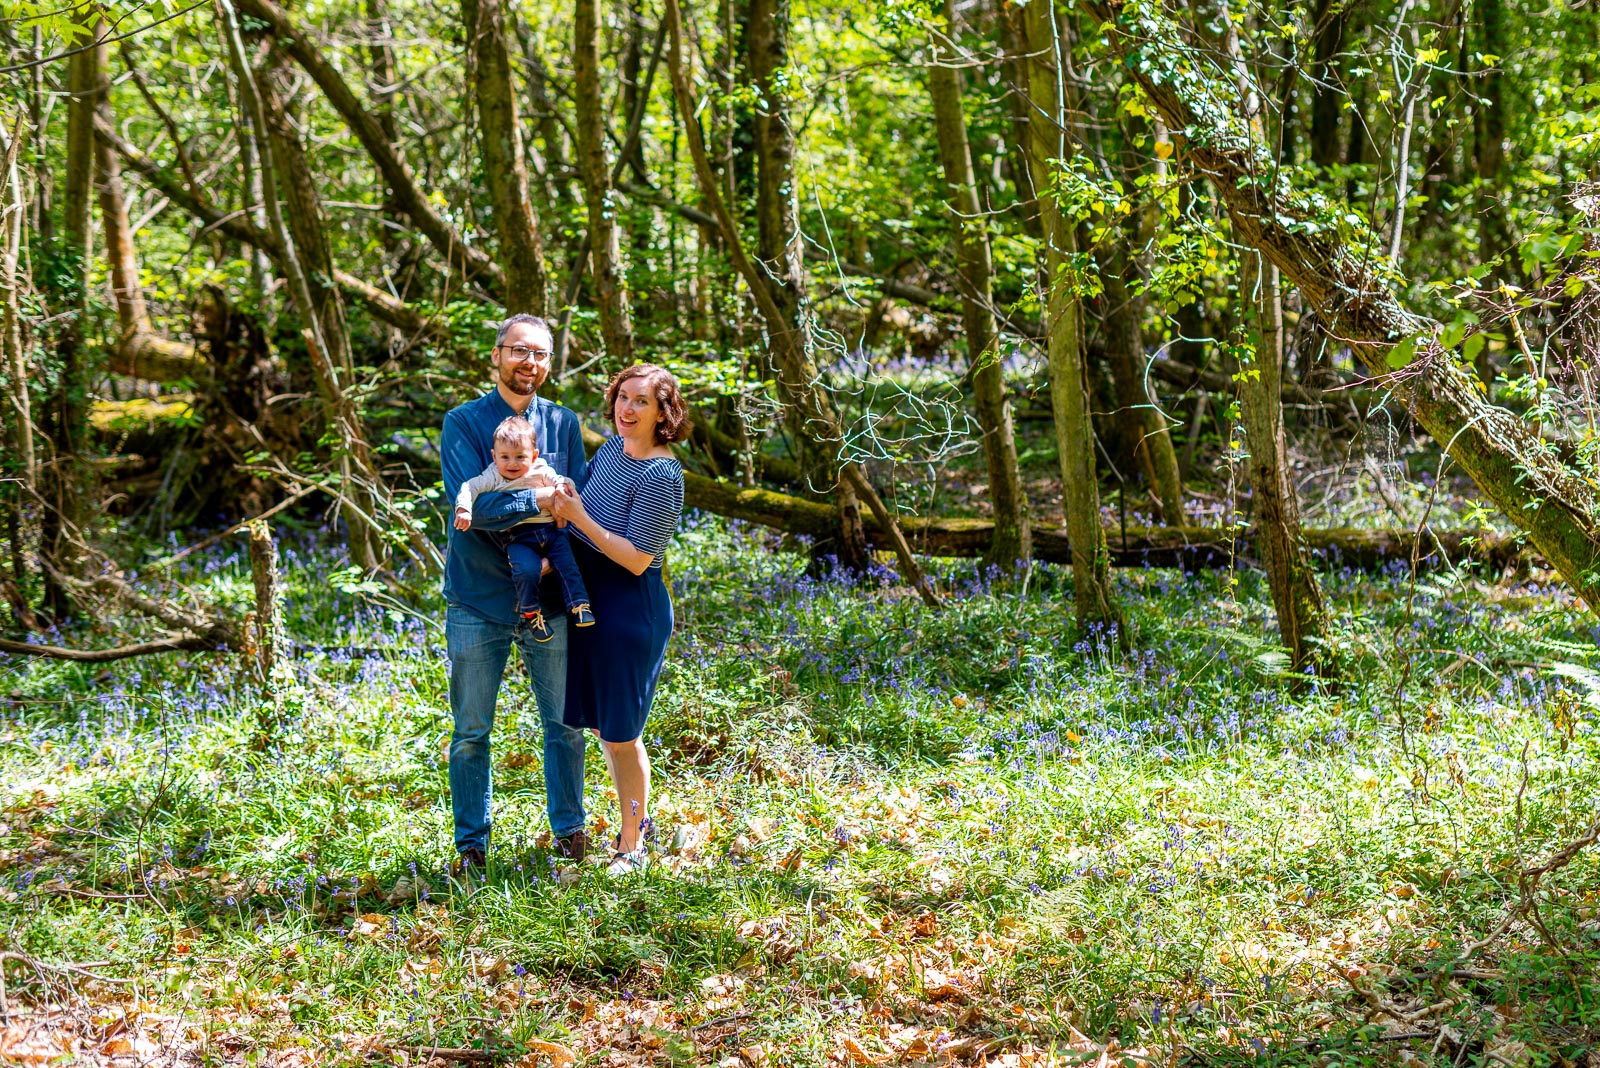 Neill, Alexis and their eight month old baby Alasdair smile at the camera in a wide angle photograph among the bluebells at Battle Great Woods.